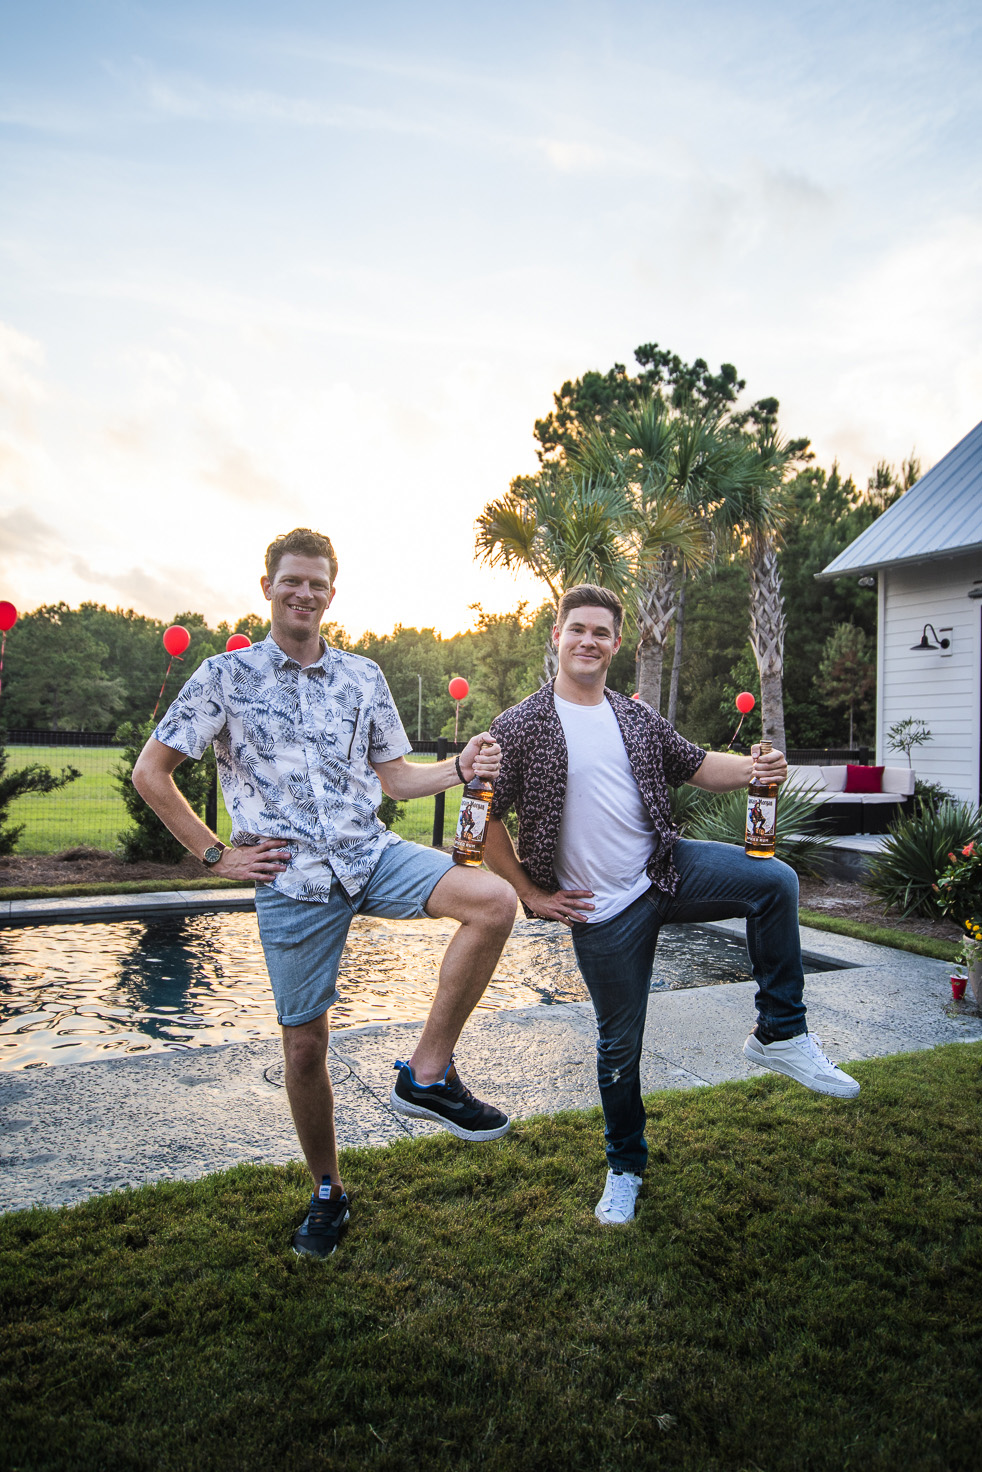 Adam Devine and Tyler Tills strike Captain Morgan's iconic one-legged pose at Tyler's surprise 30th birthday party.